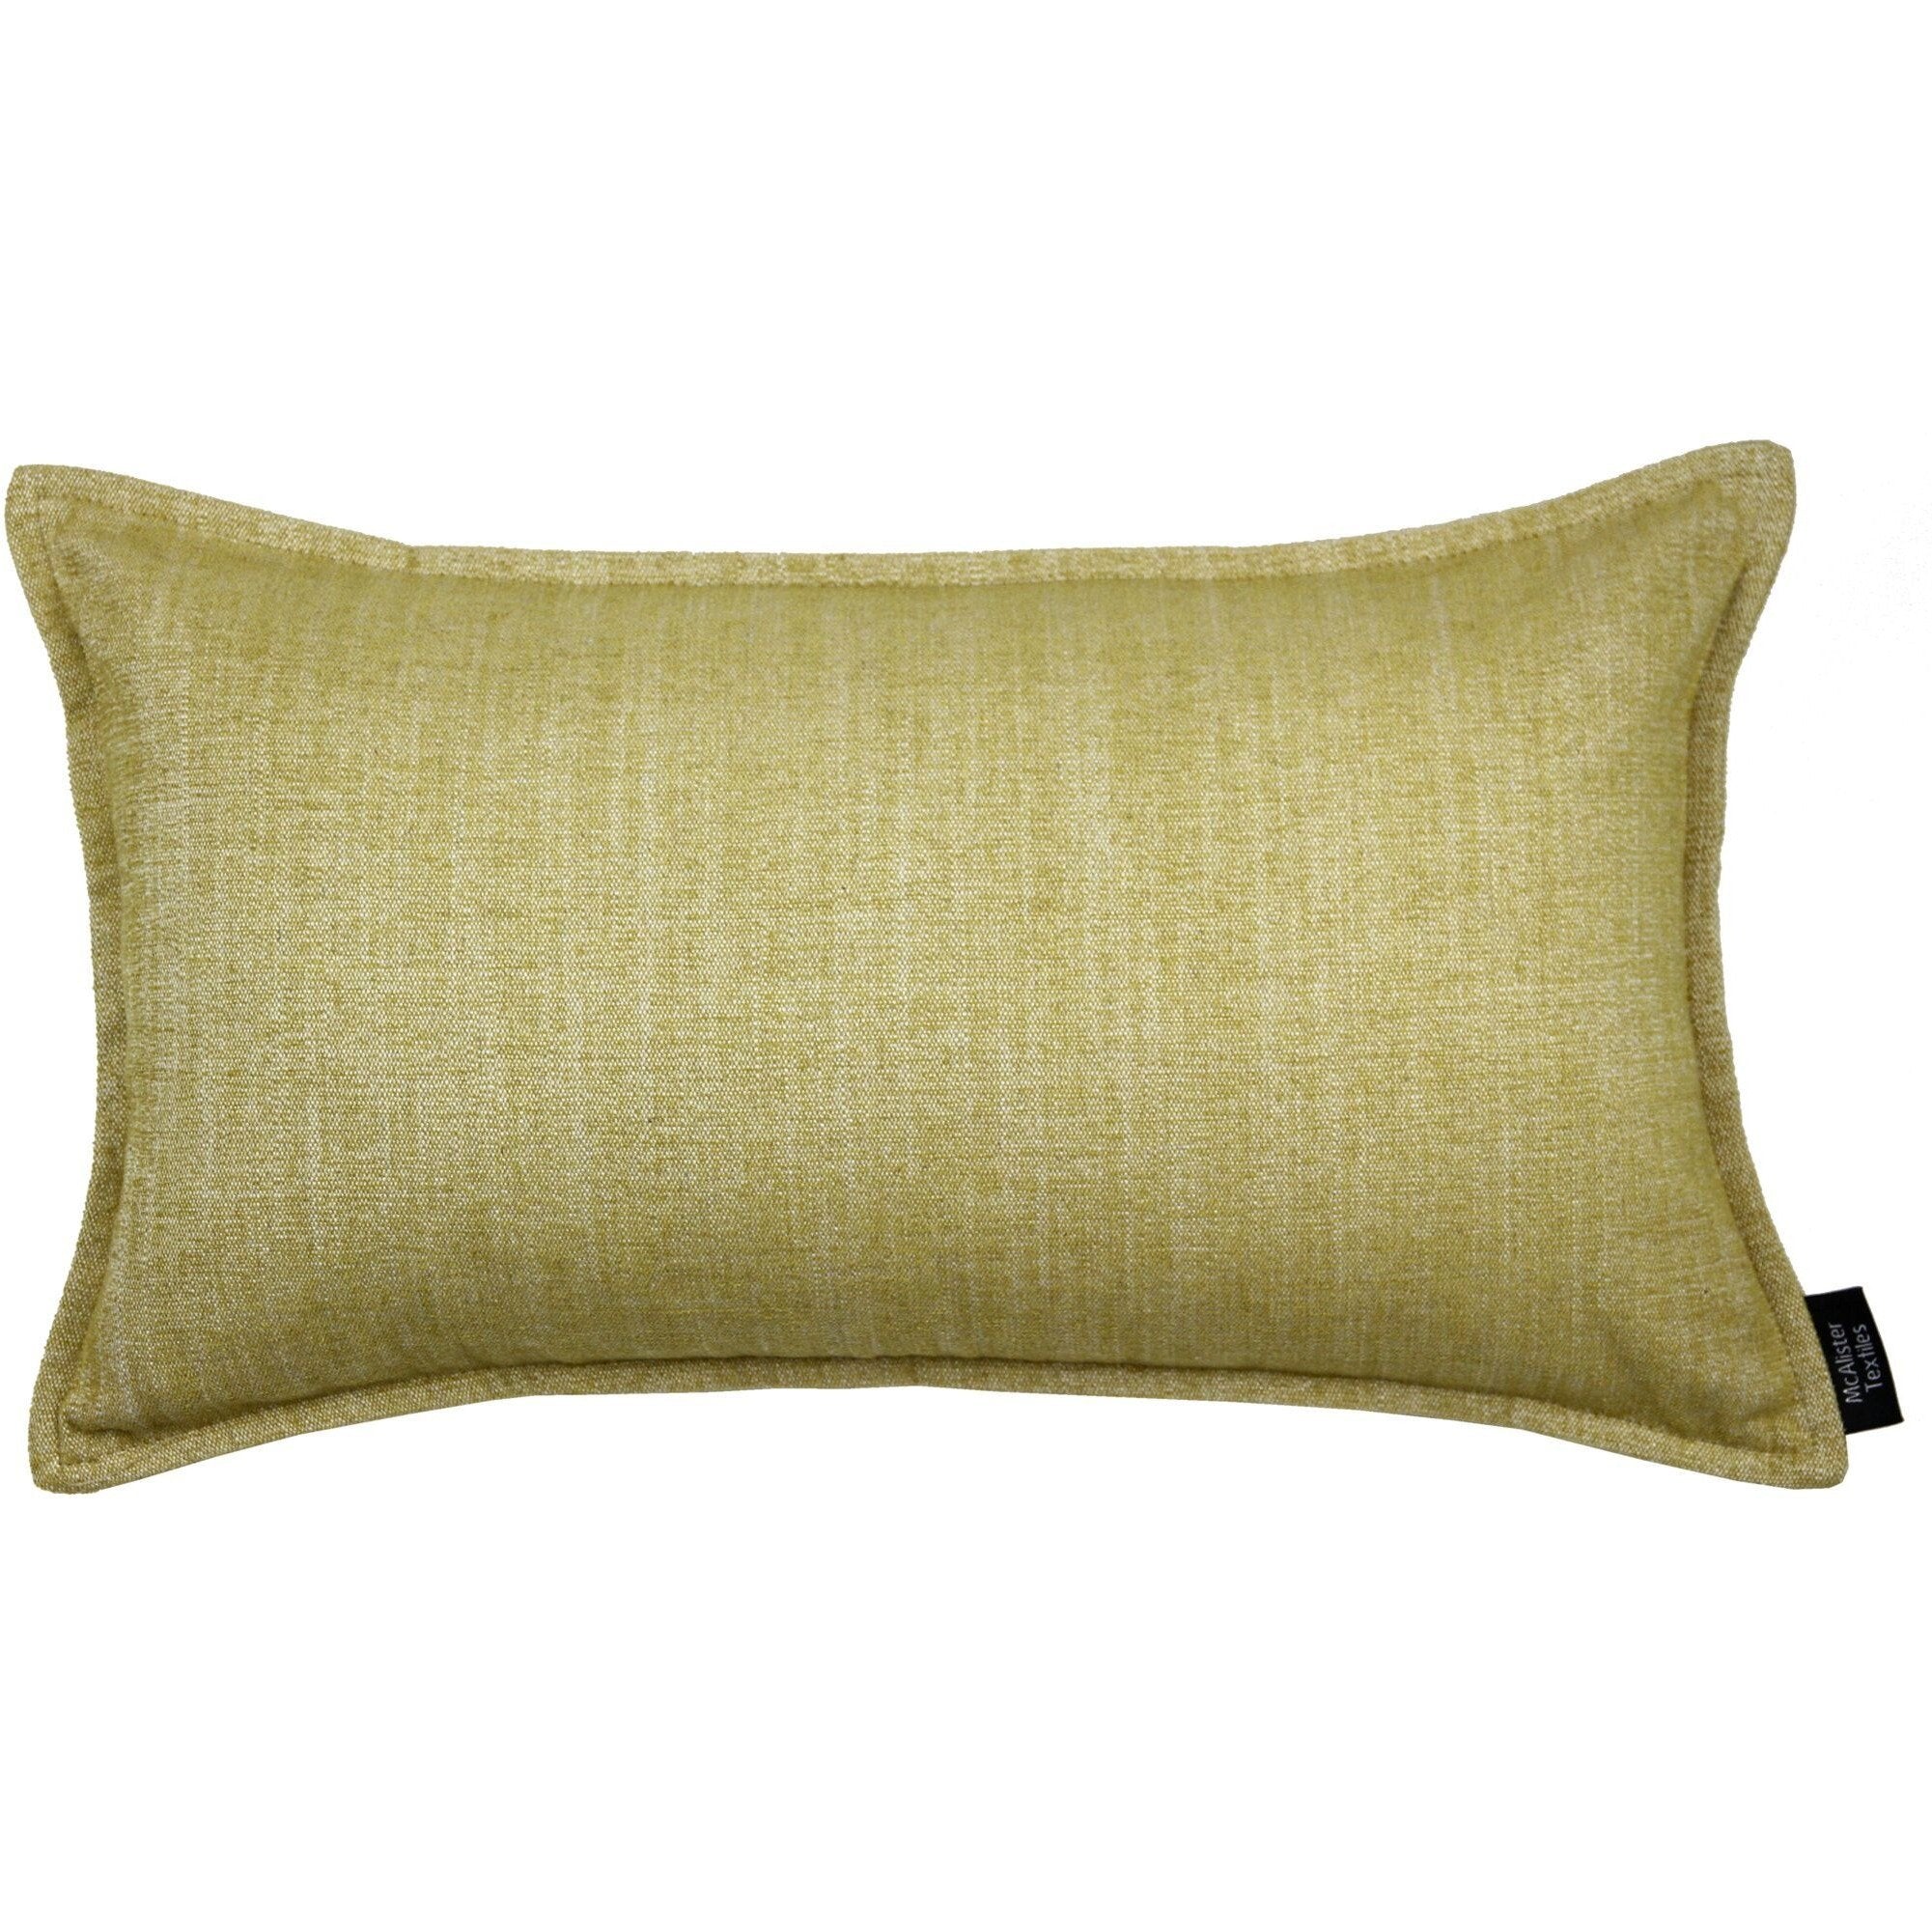 McAlister Textiles Rhumba Ochre Yellow Cushion Cushions and Covers Cover Only 50cm x 30cm 